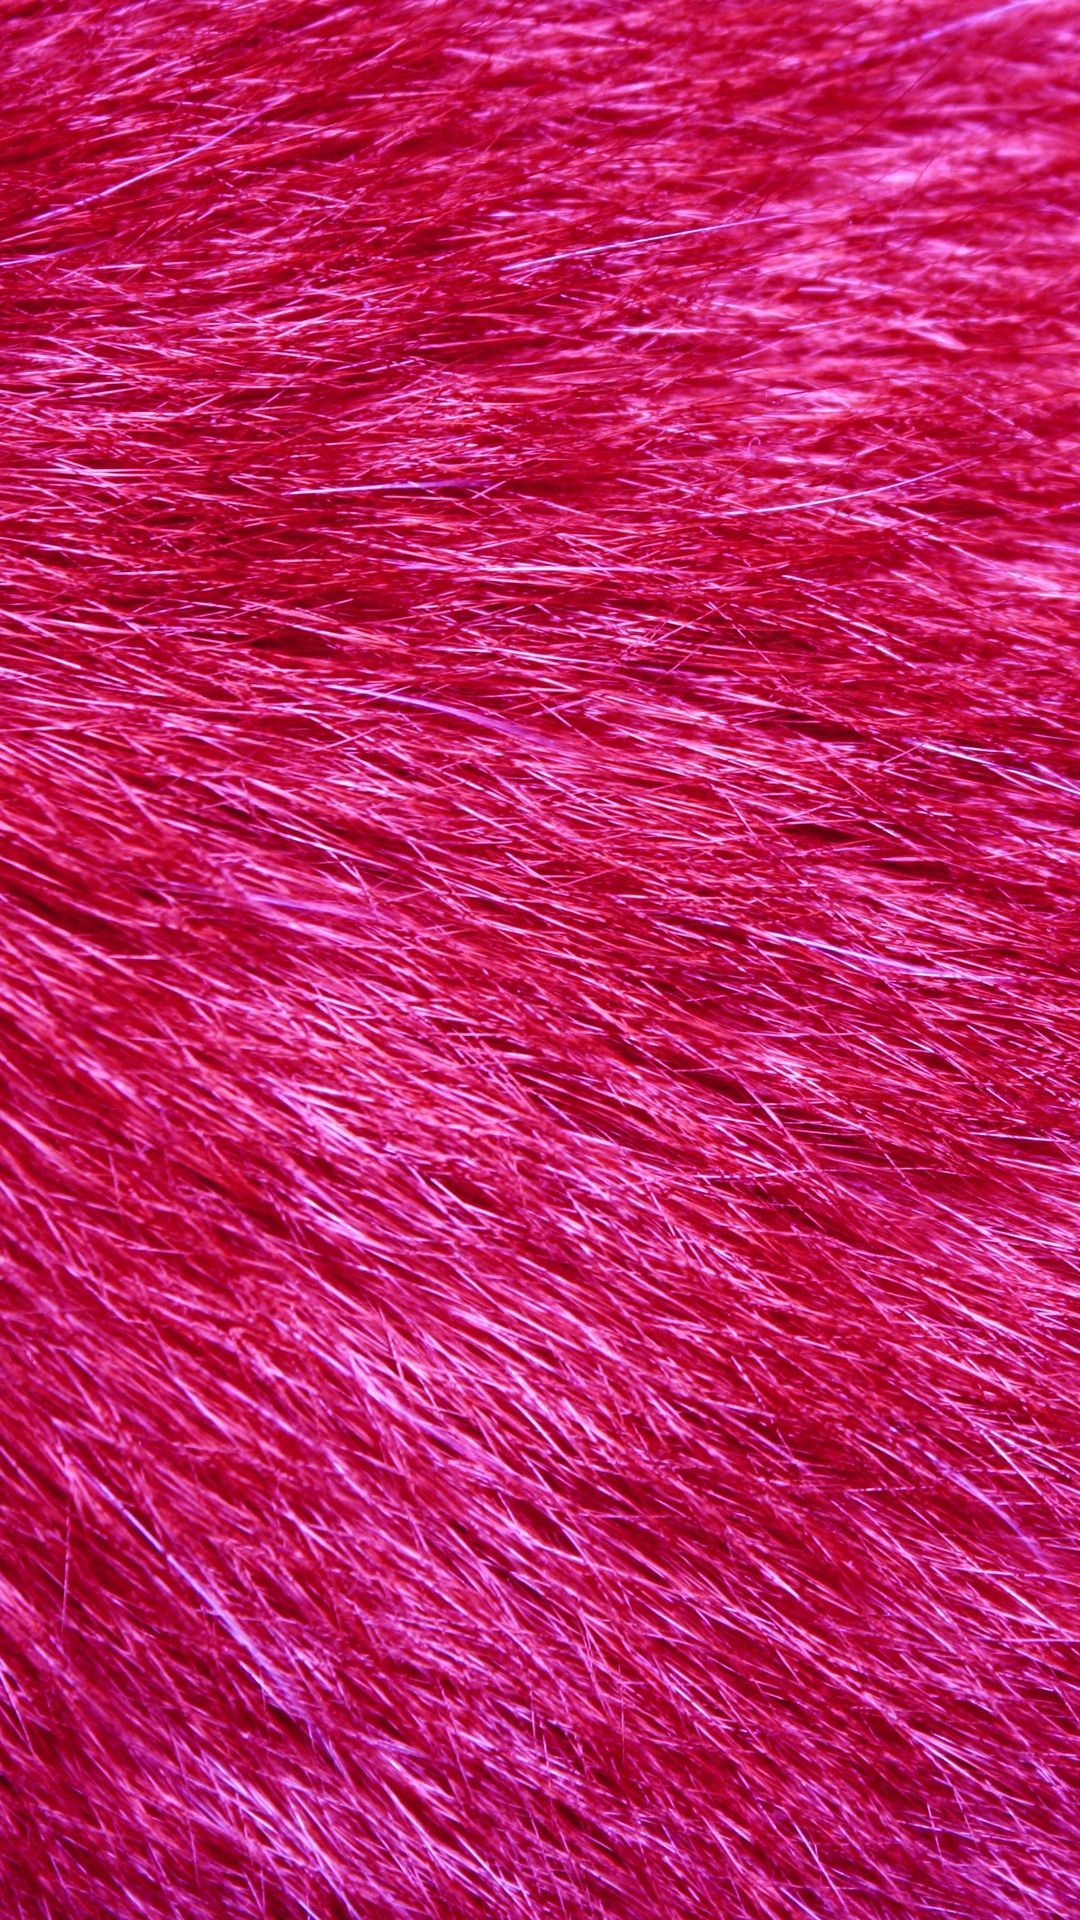 Pink Fluffy to see more fluffy wallpaper!